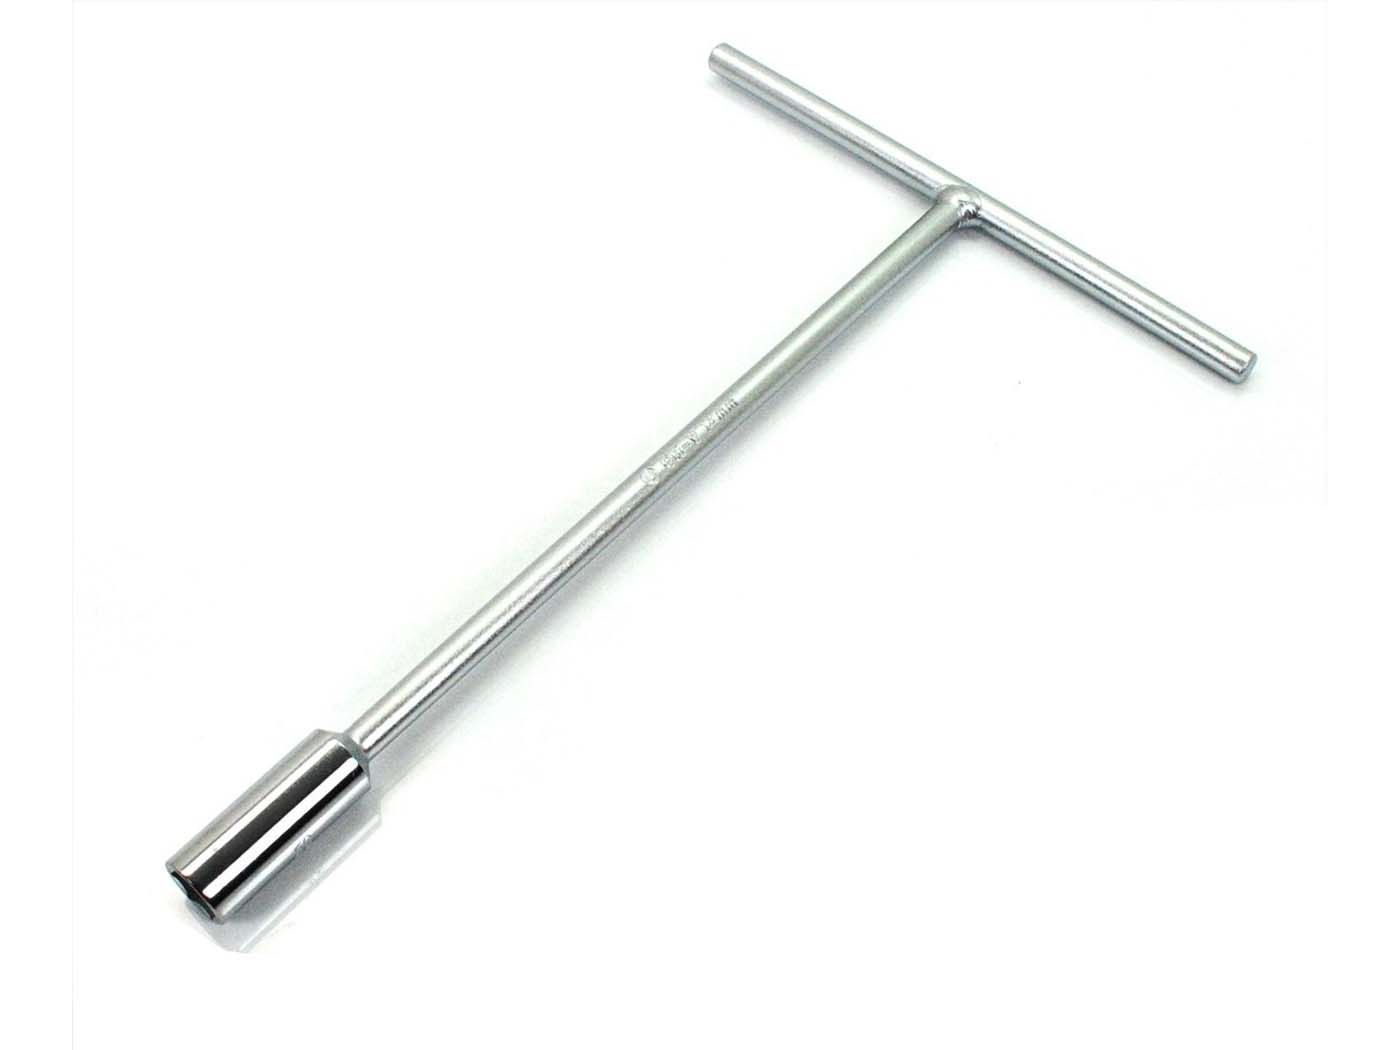 Workshop T Wrench Tool 14mm